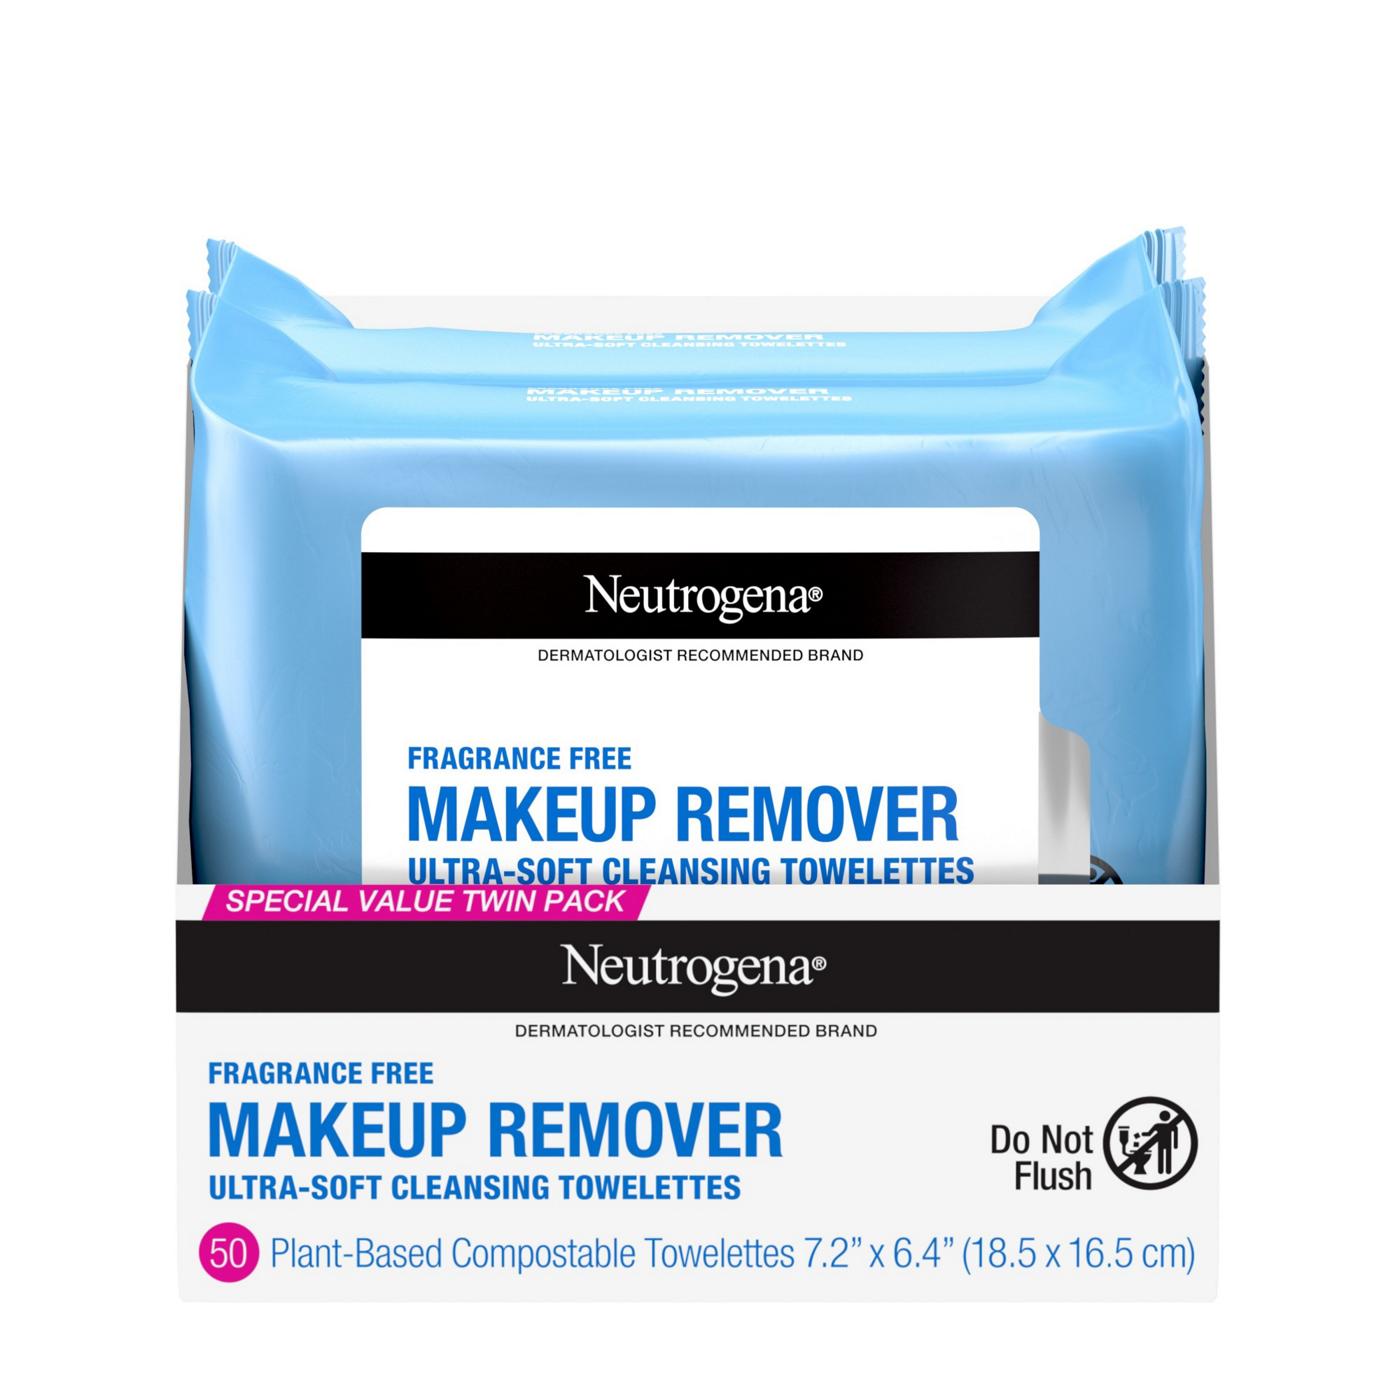 Neutrogena Makeup Remover Fragrance Free Cleansing Towelettes - Twin Pack; image 1 of 8